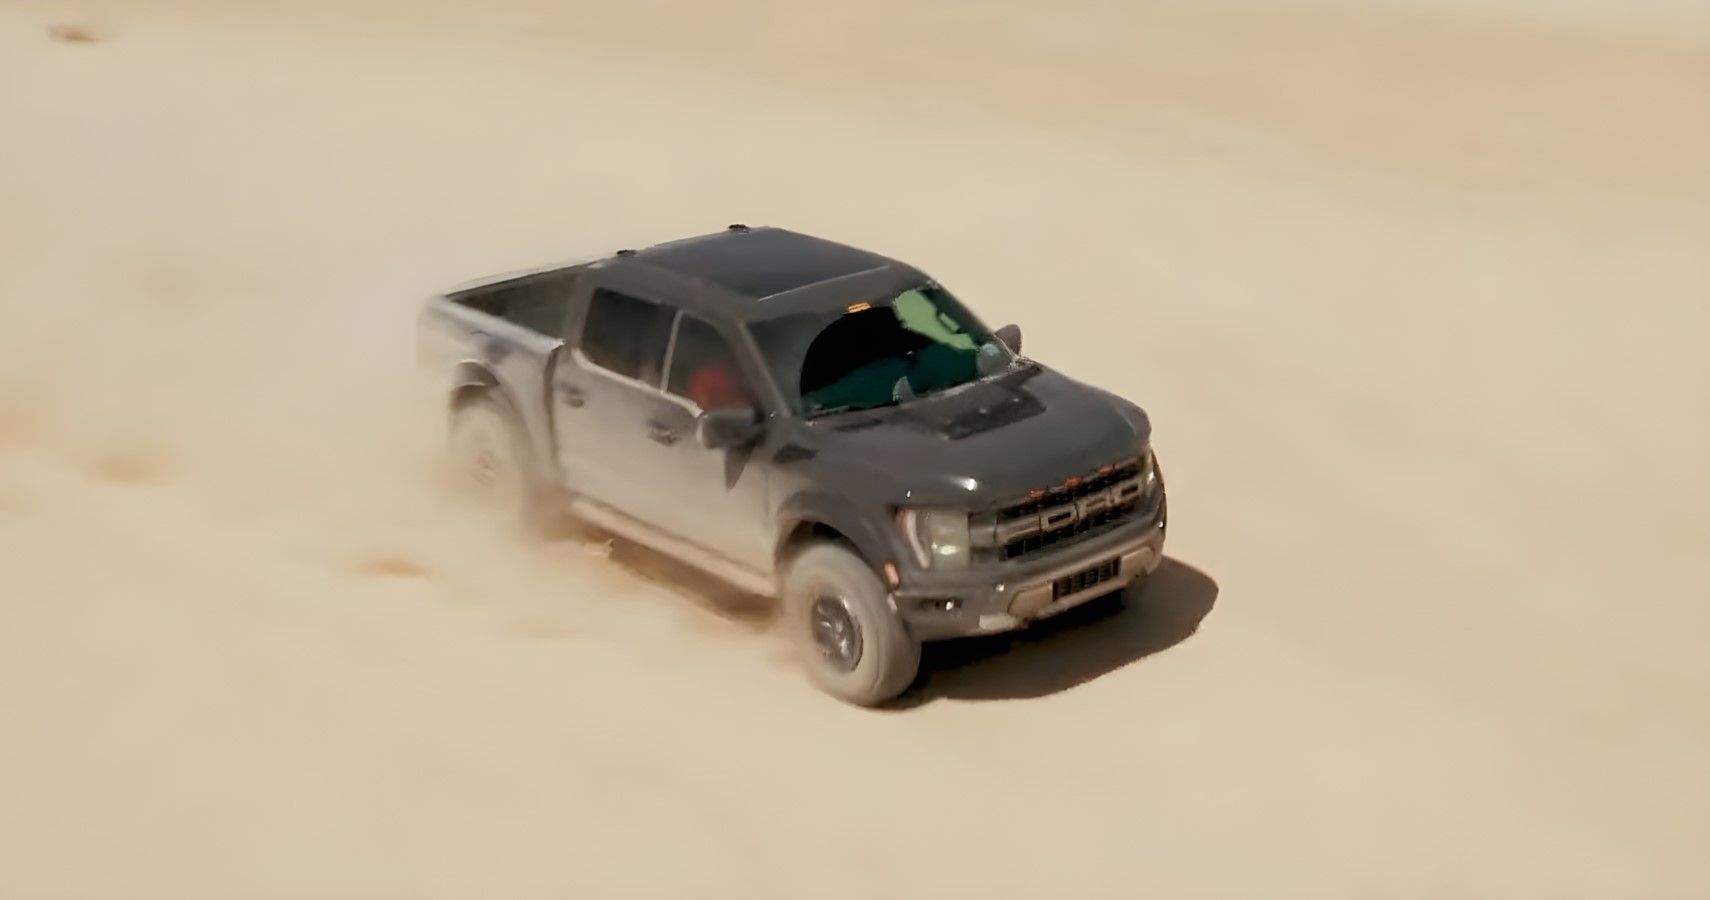 2023 Ford F-150 Raptor R spy picture ariel view